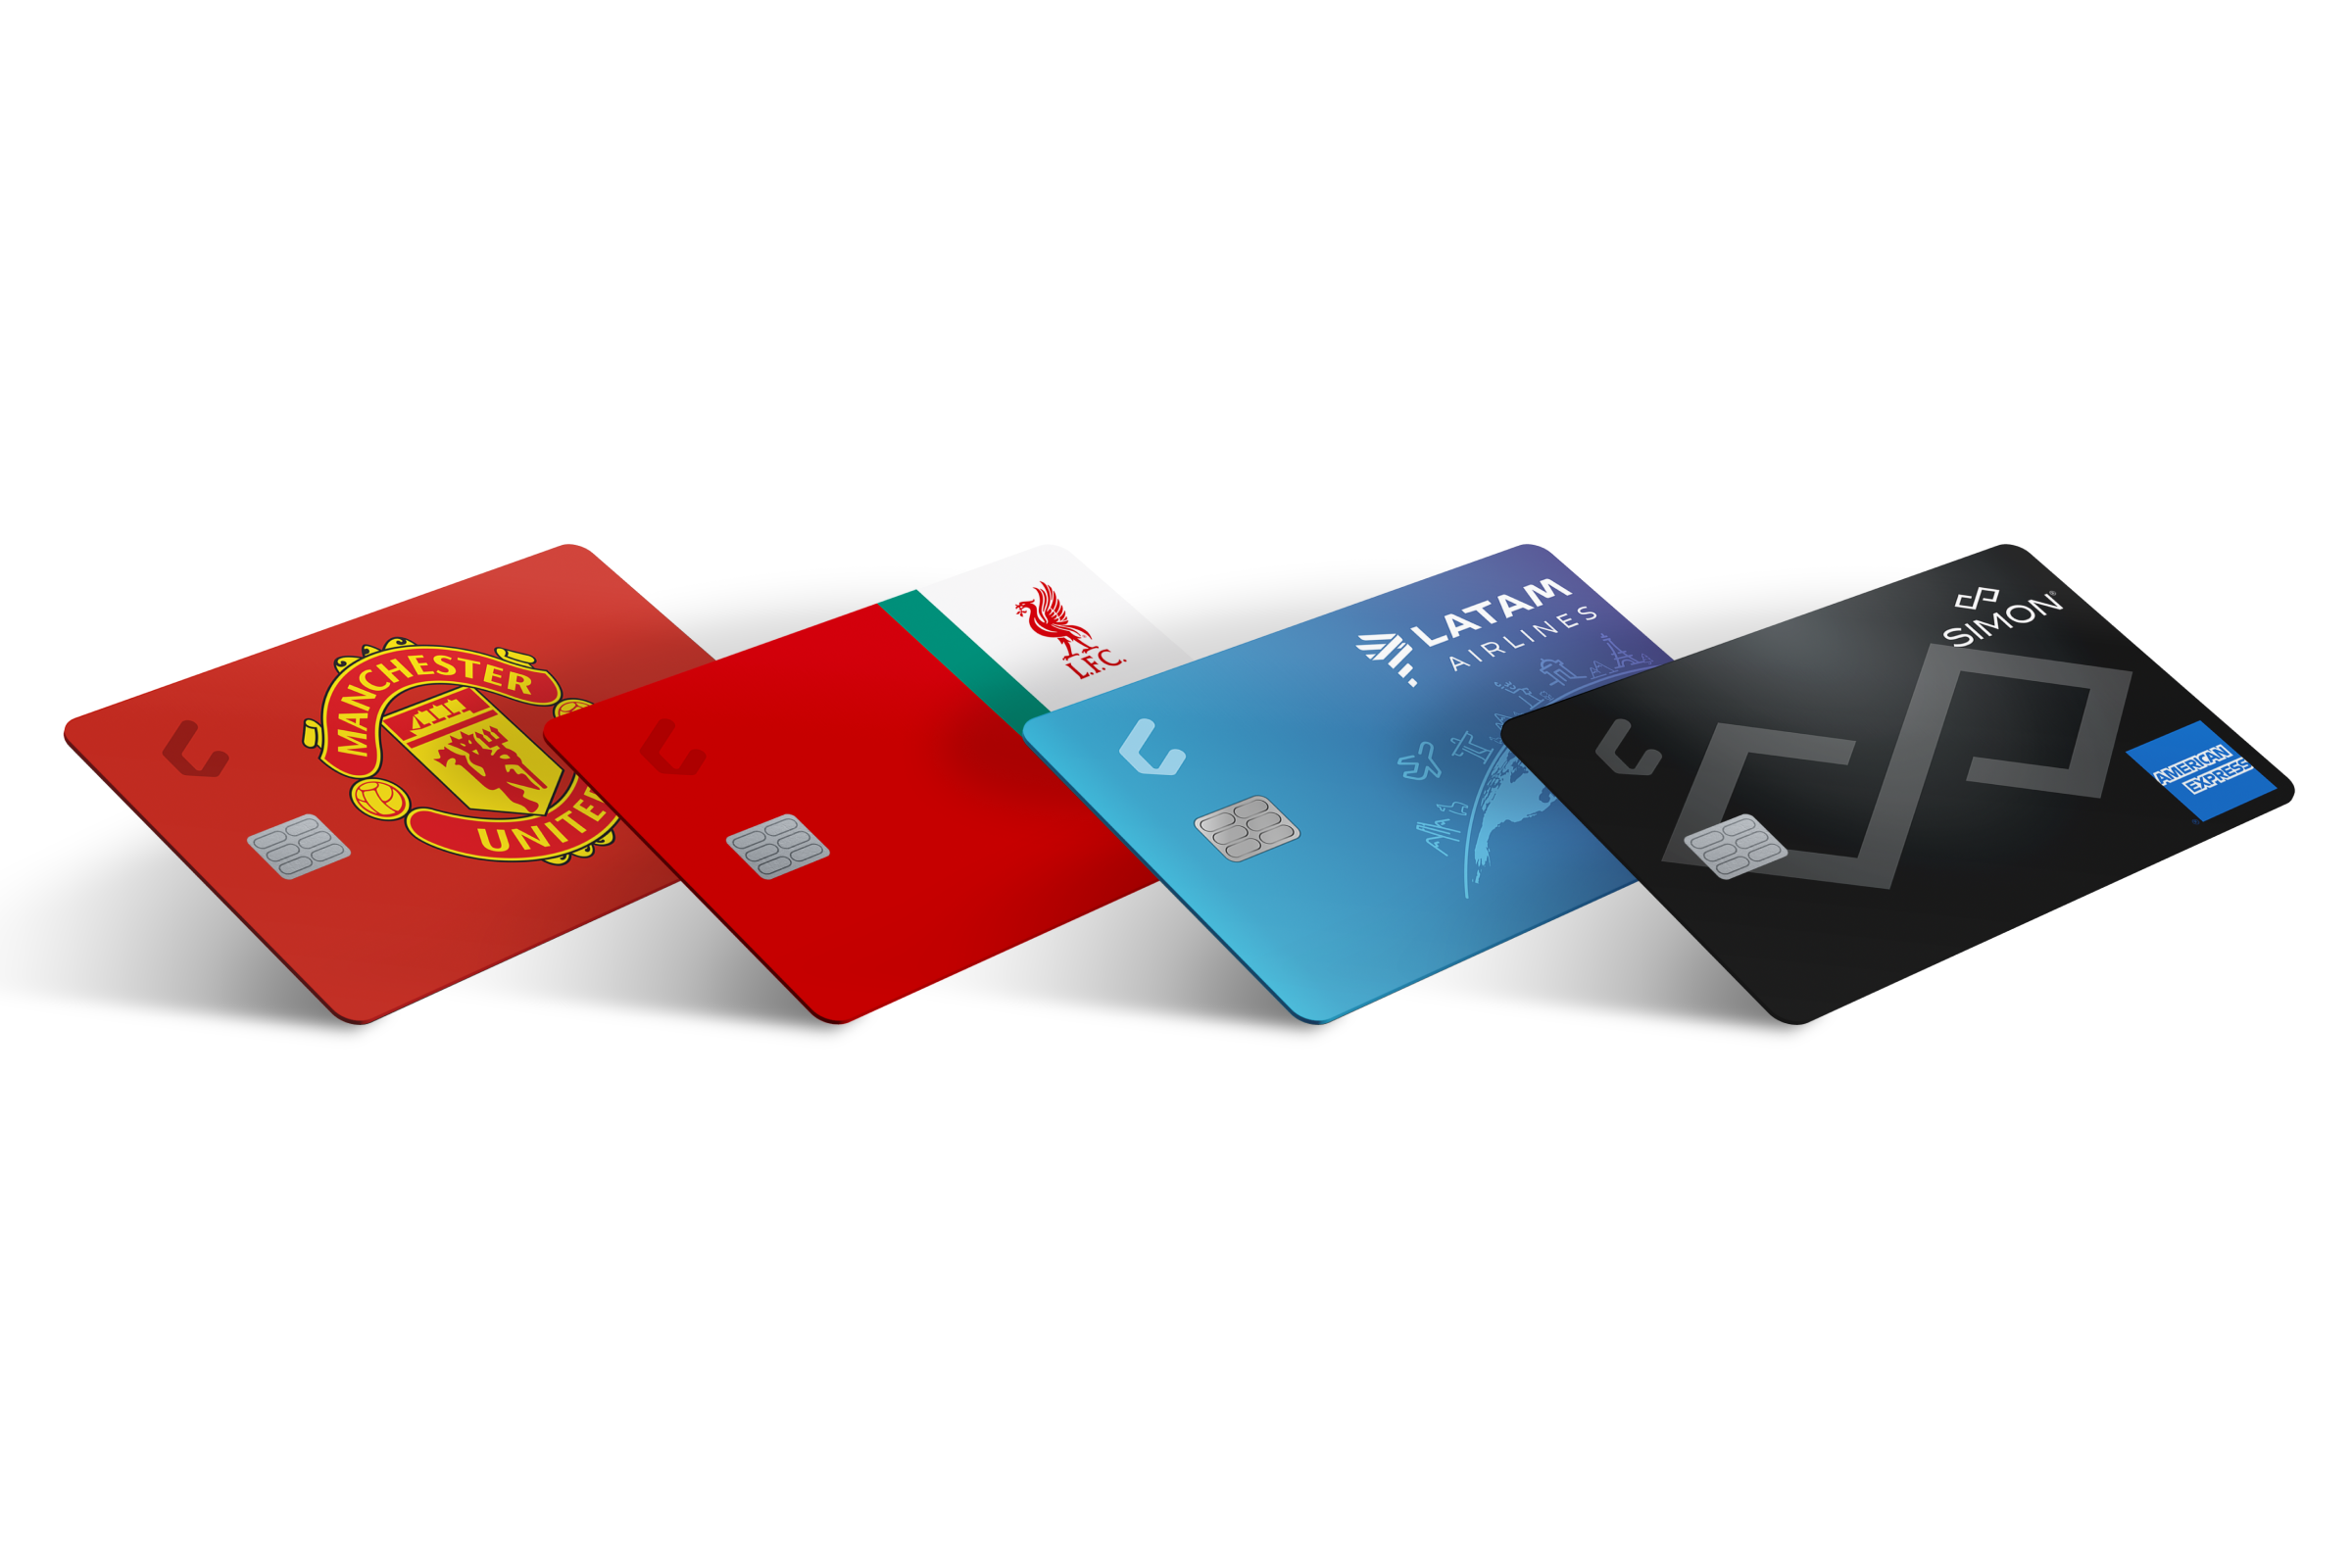 Bank Card: AMERICAN EXPRESS - RED (American Express, United